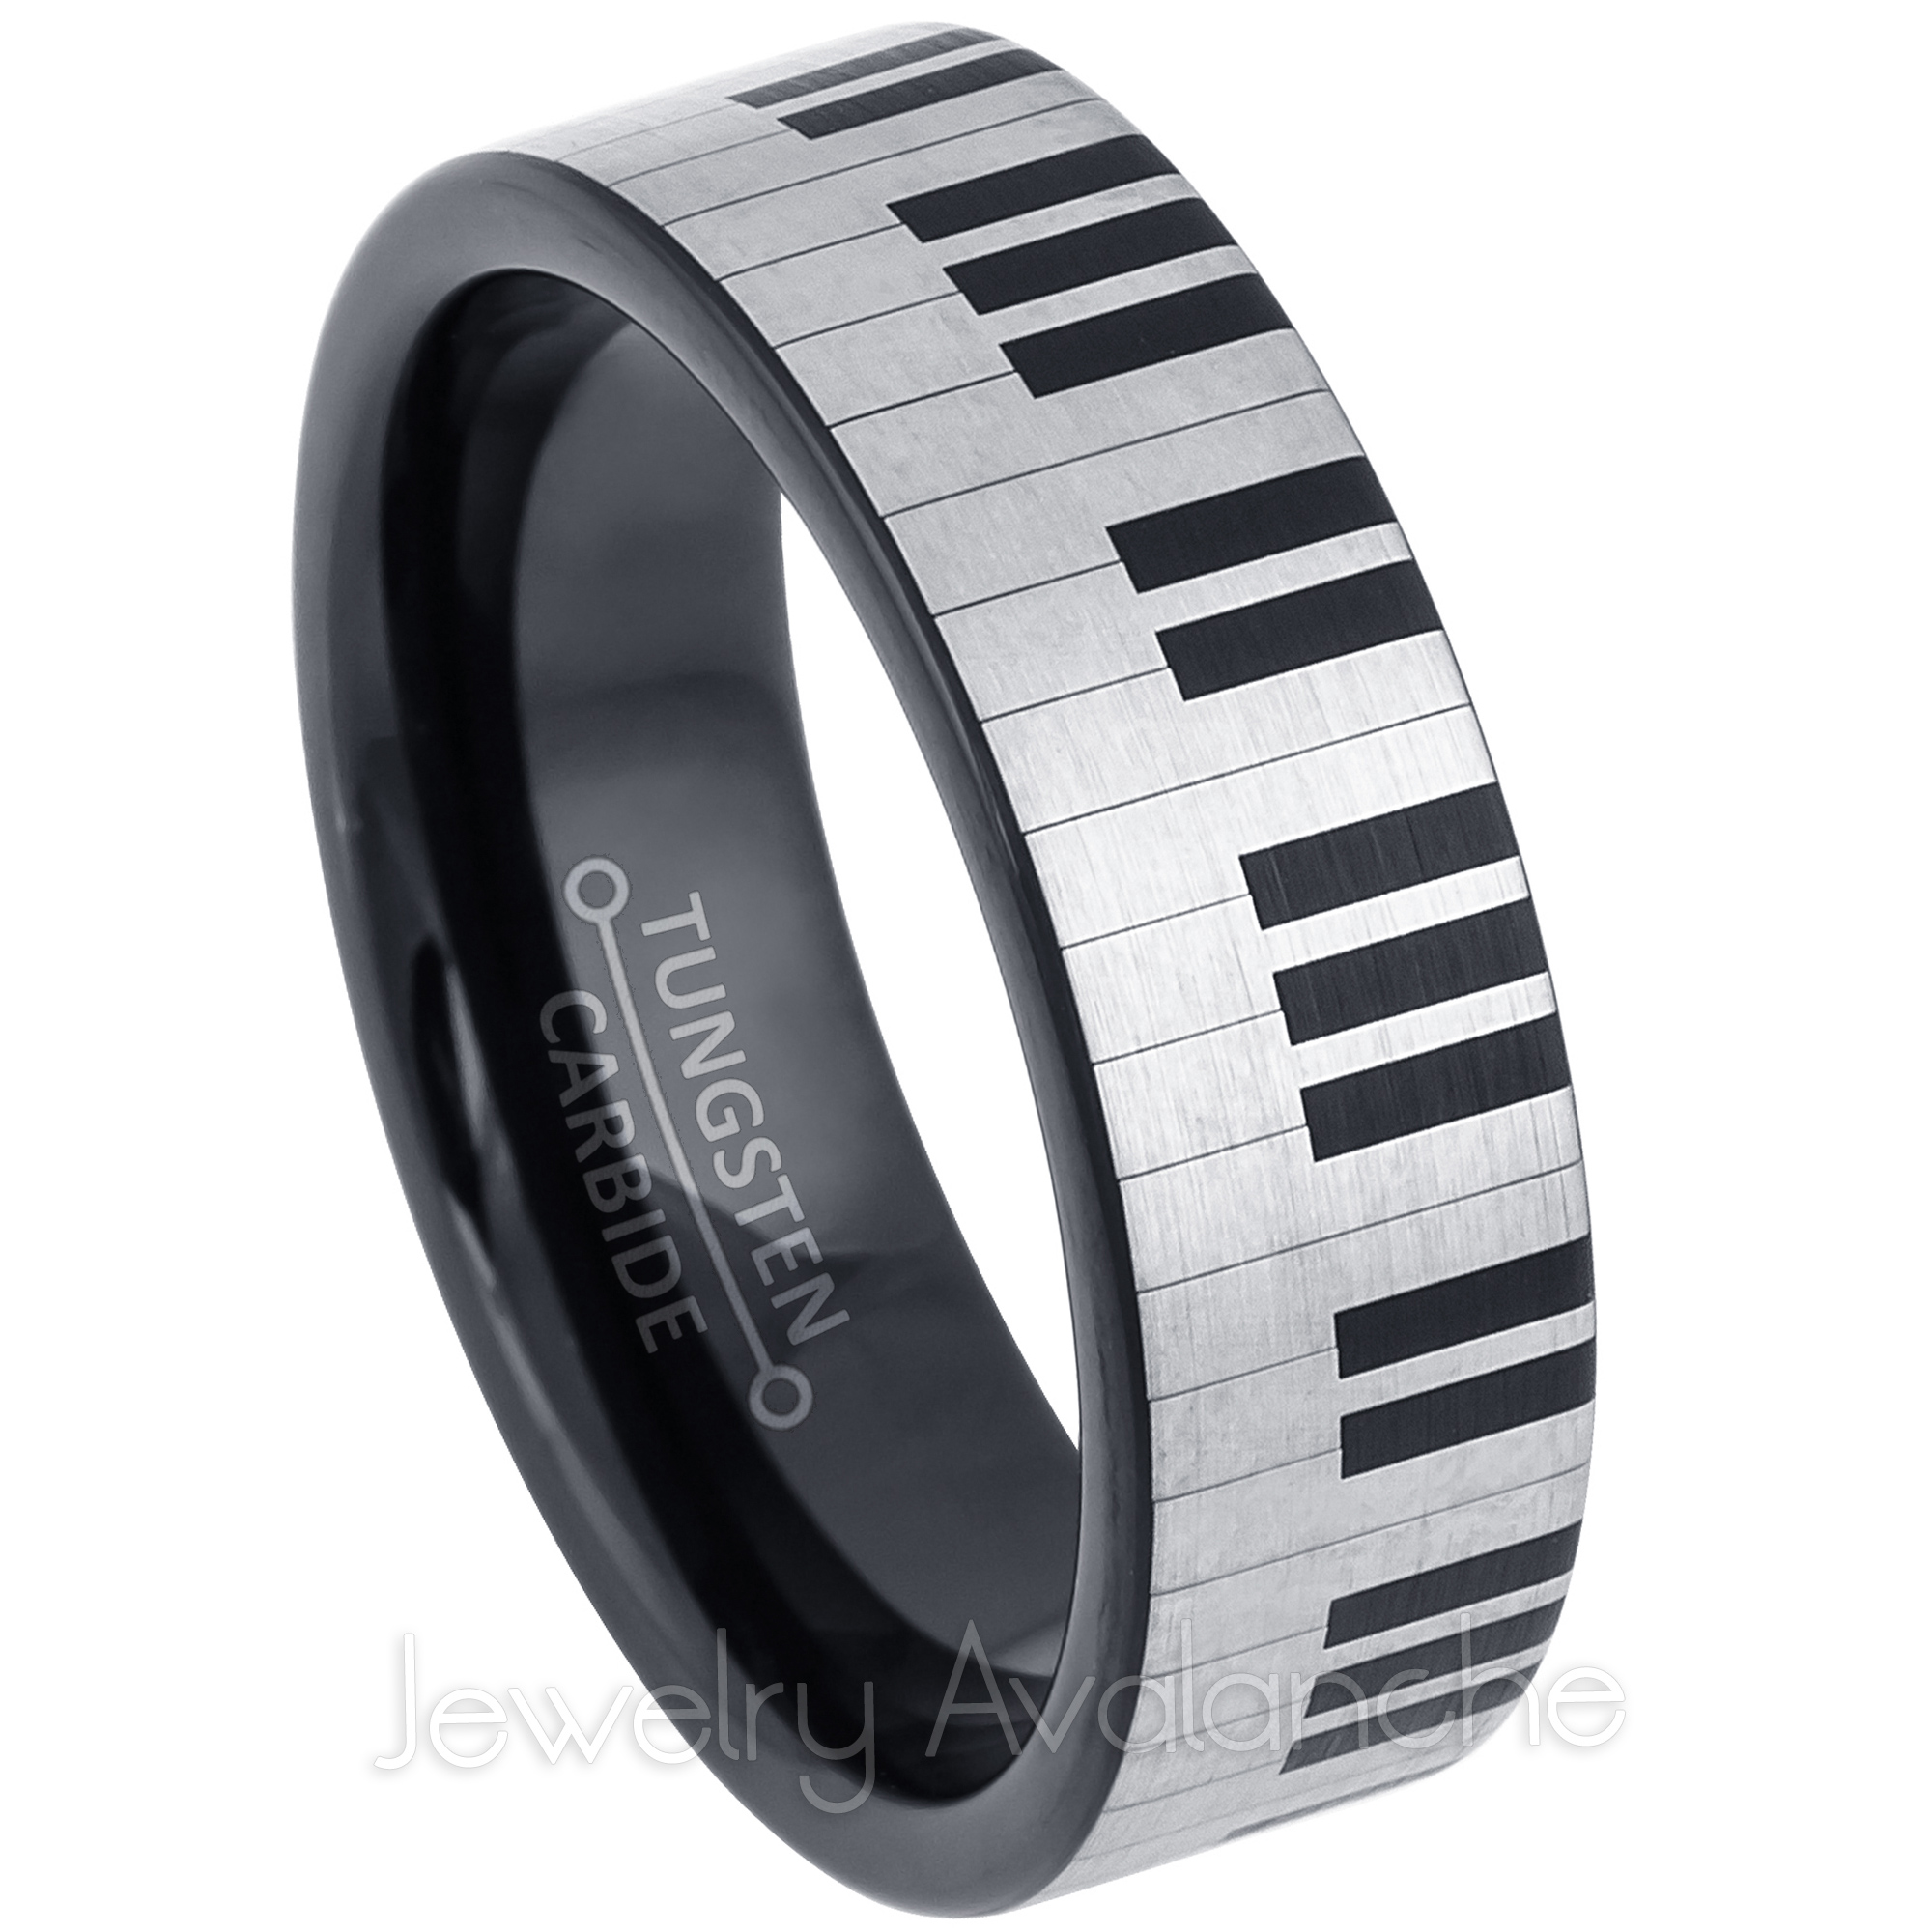 Tungsten Carbide Silver Brush Shiny Groove Wedding Band Ring Details about   Free Engraving